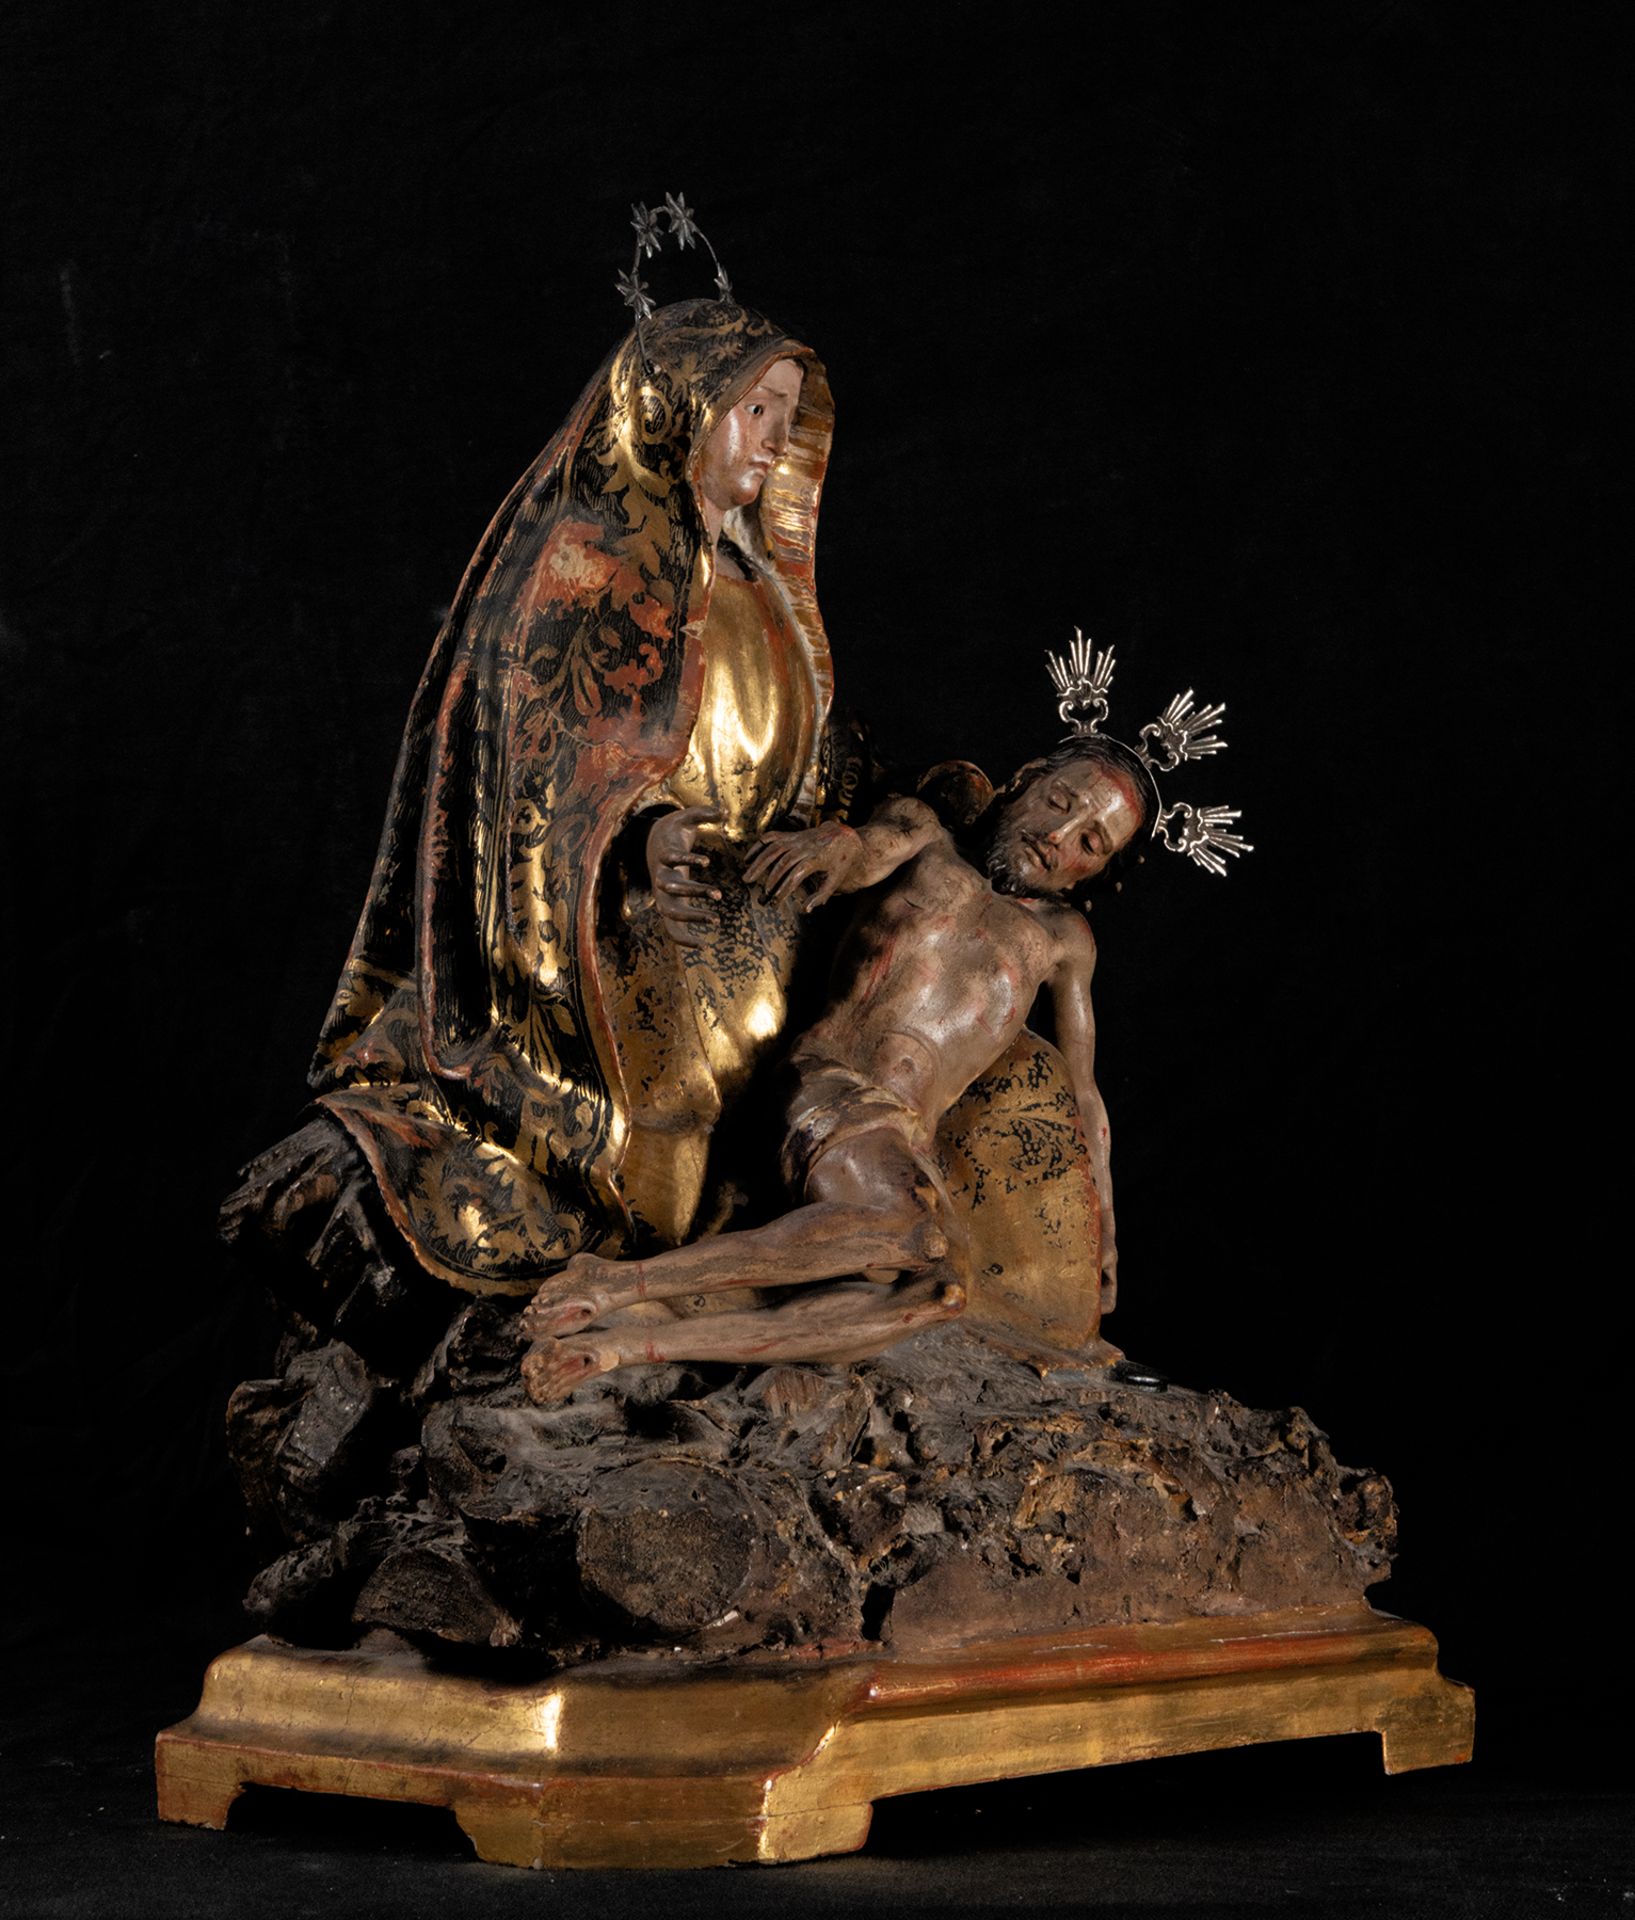 Exceptional Pieta depicting Mary with Christ in her arms, Guatemala, early 18th century Novohisopano - Image 5 of 8